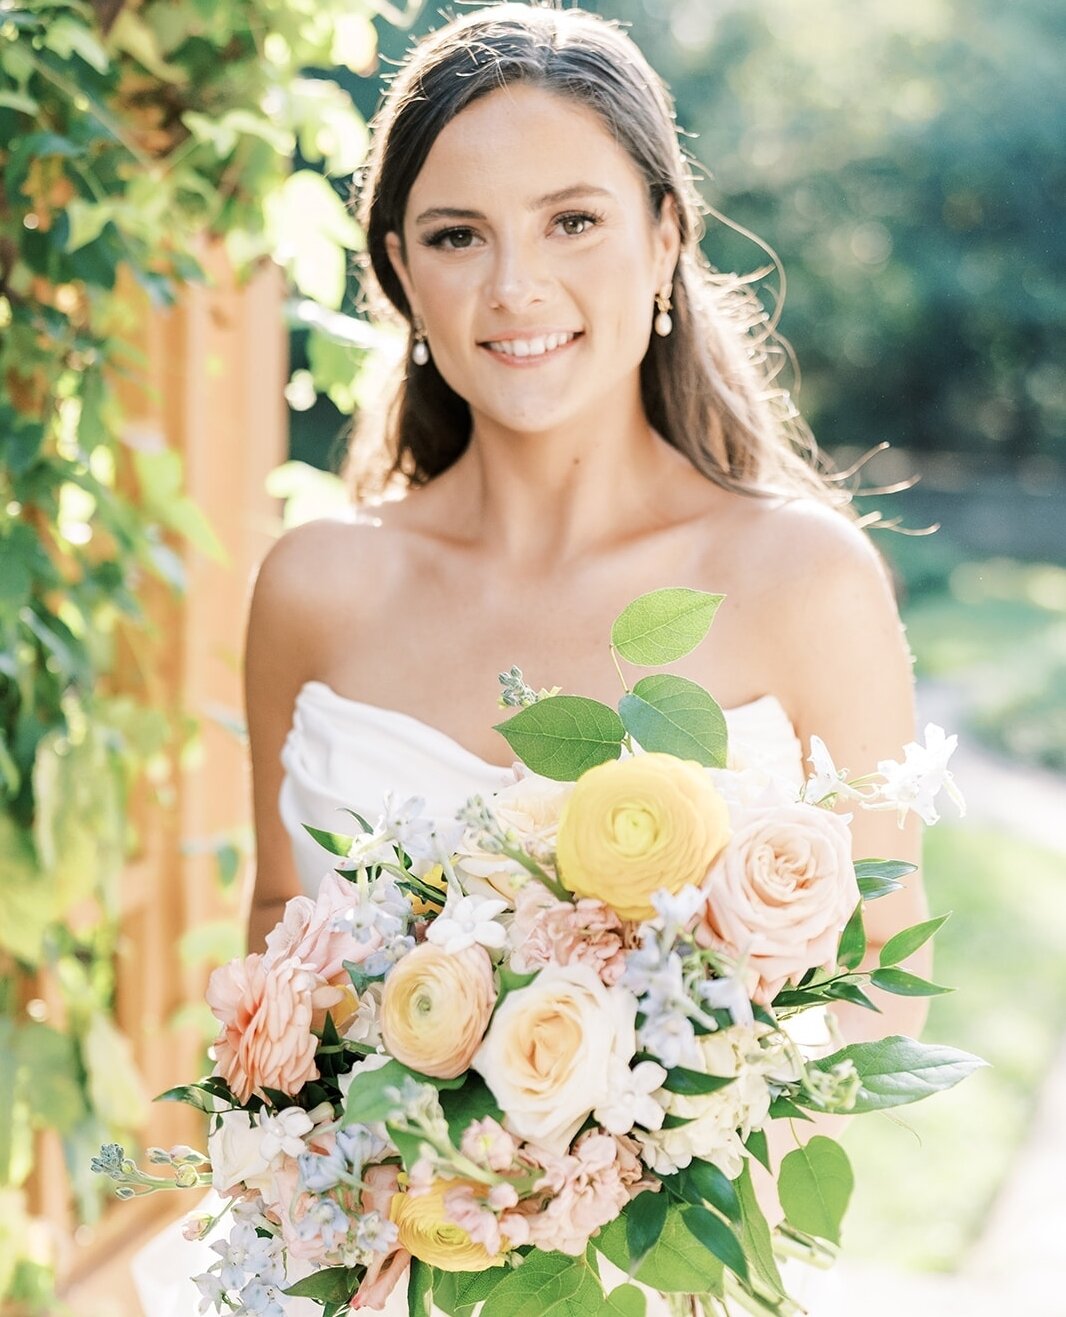 Mary's delicate pastel bouquet is giving amazing #springvibes! Color is IN this year, and we love it all - from bold jewel tones to this soft, dreamy palette. 🎨⁠
⁠
Photos: @blkphotographyphotos